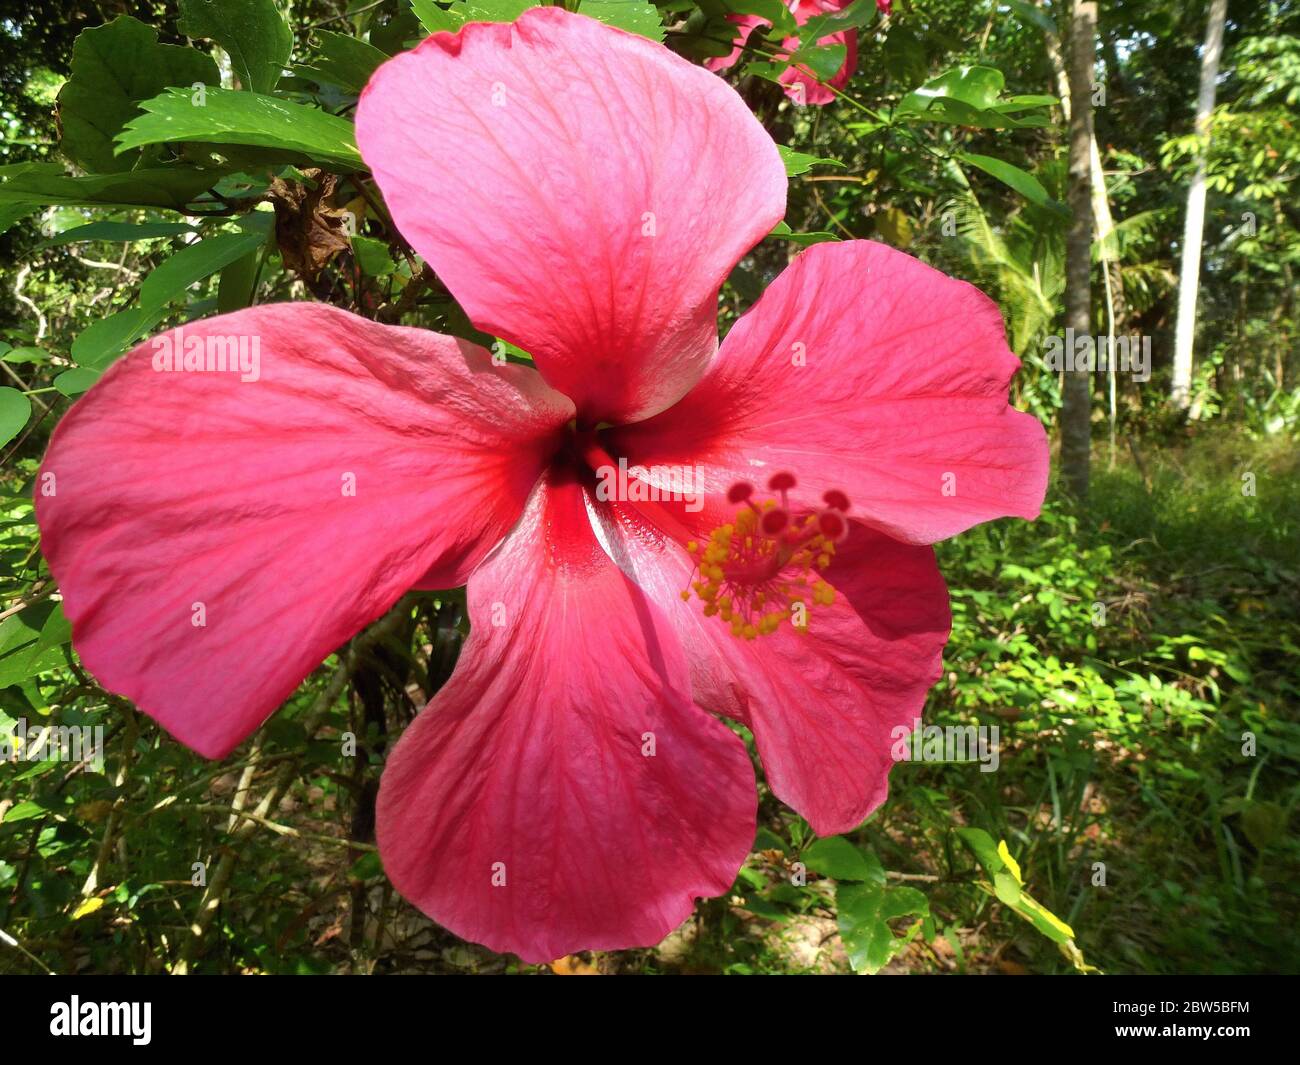 Closeup of a eautiful red hibiscus flower Stock Photo